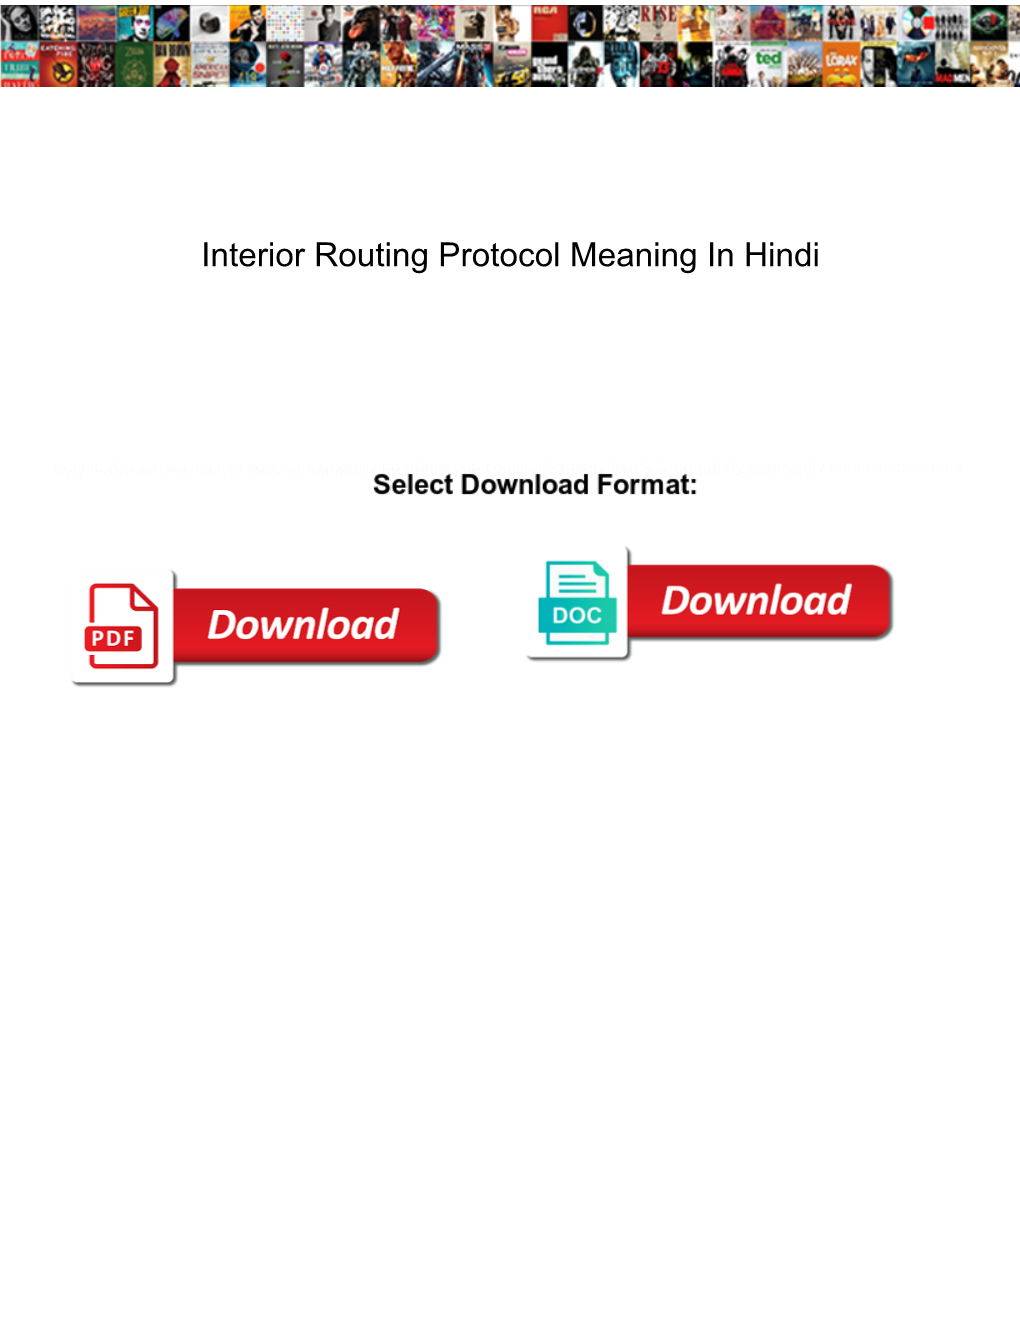 Interior Routing Protocol Meaning in Hindi